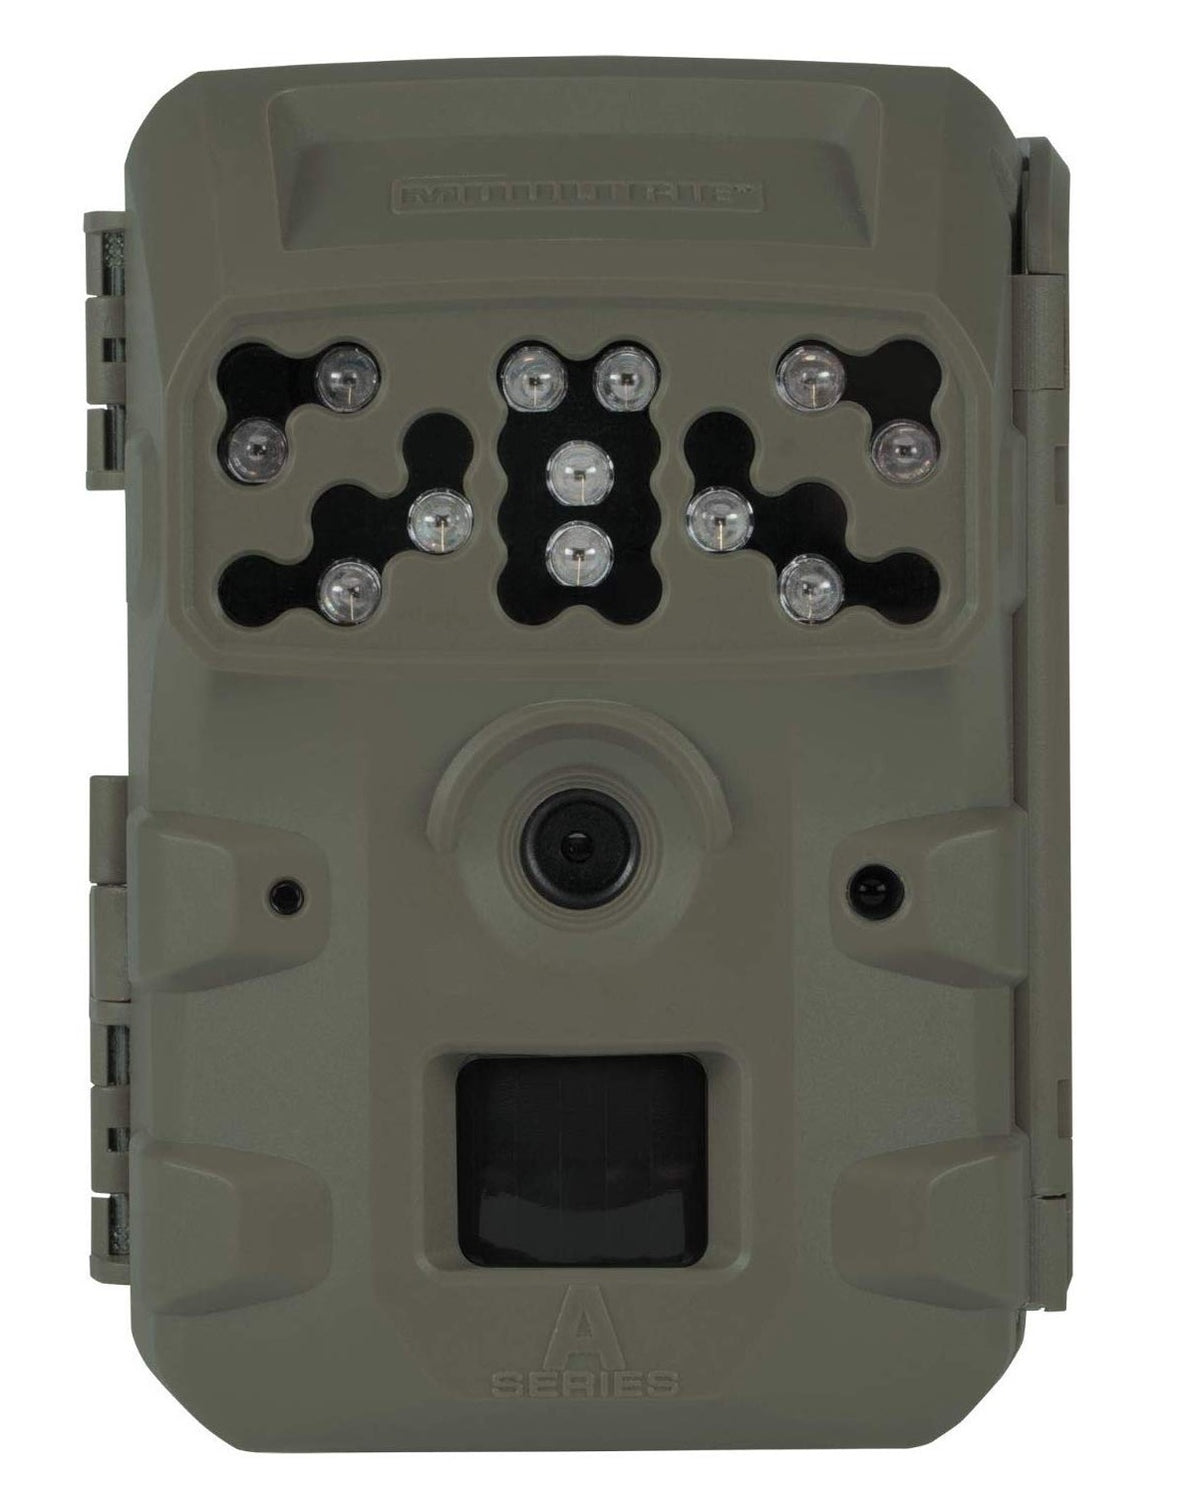 Moultrie MCG-13334 (A-700) Game Camera